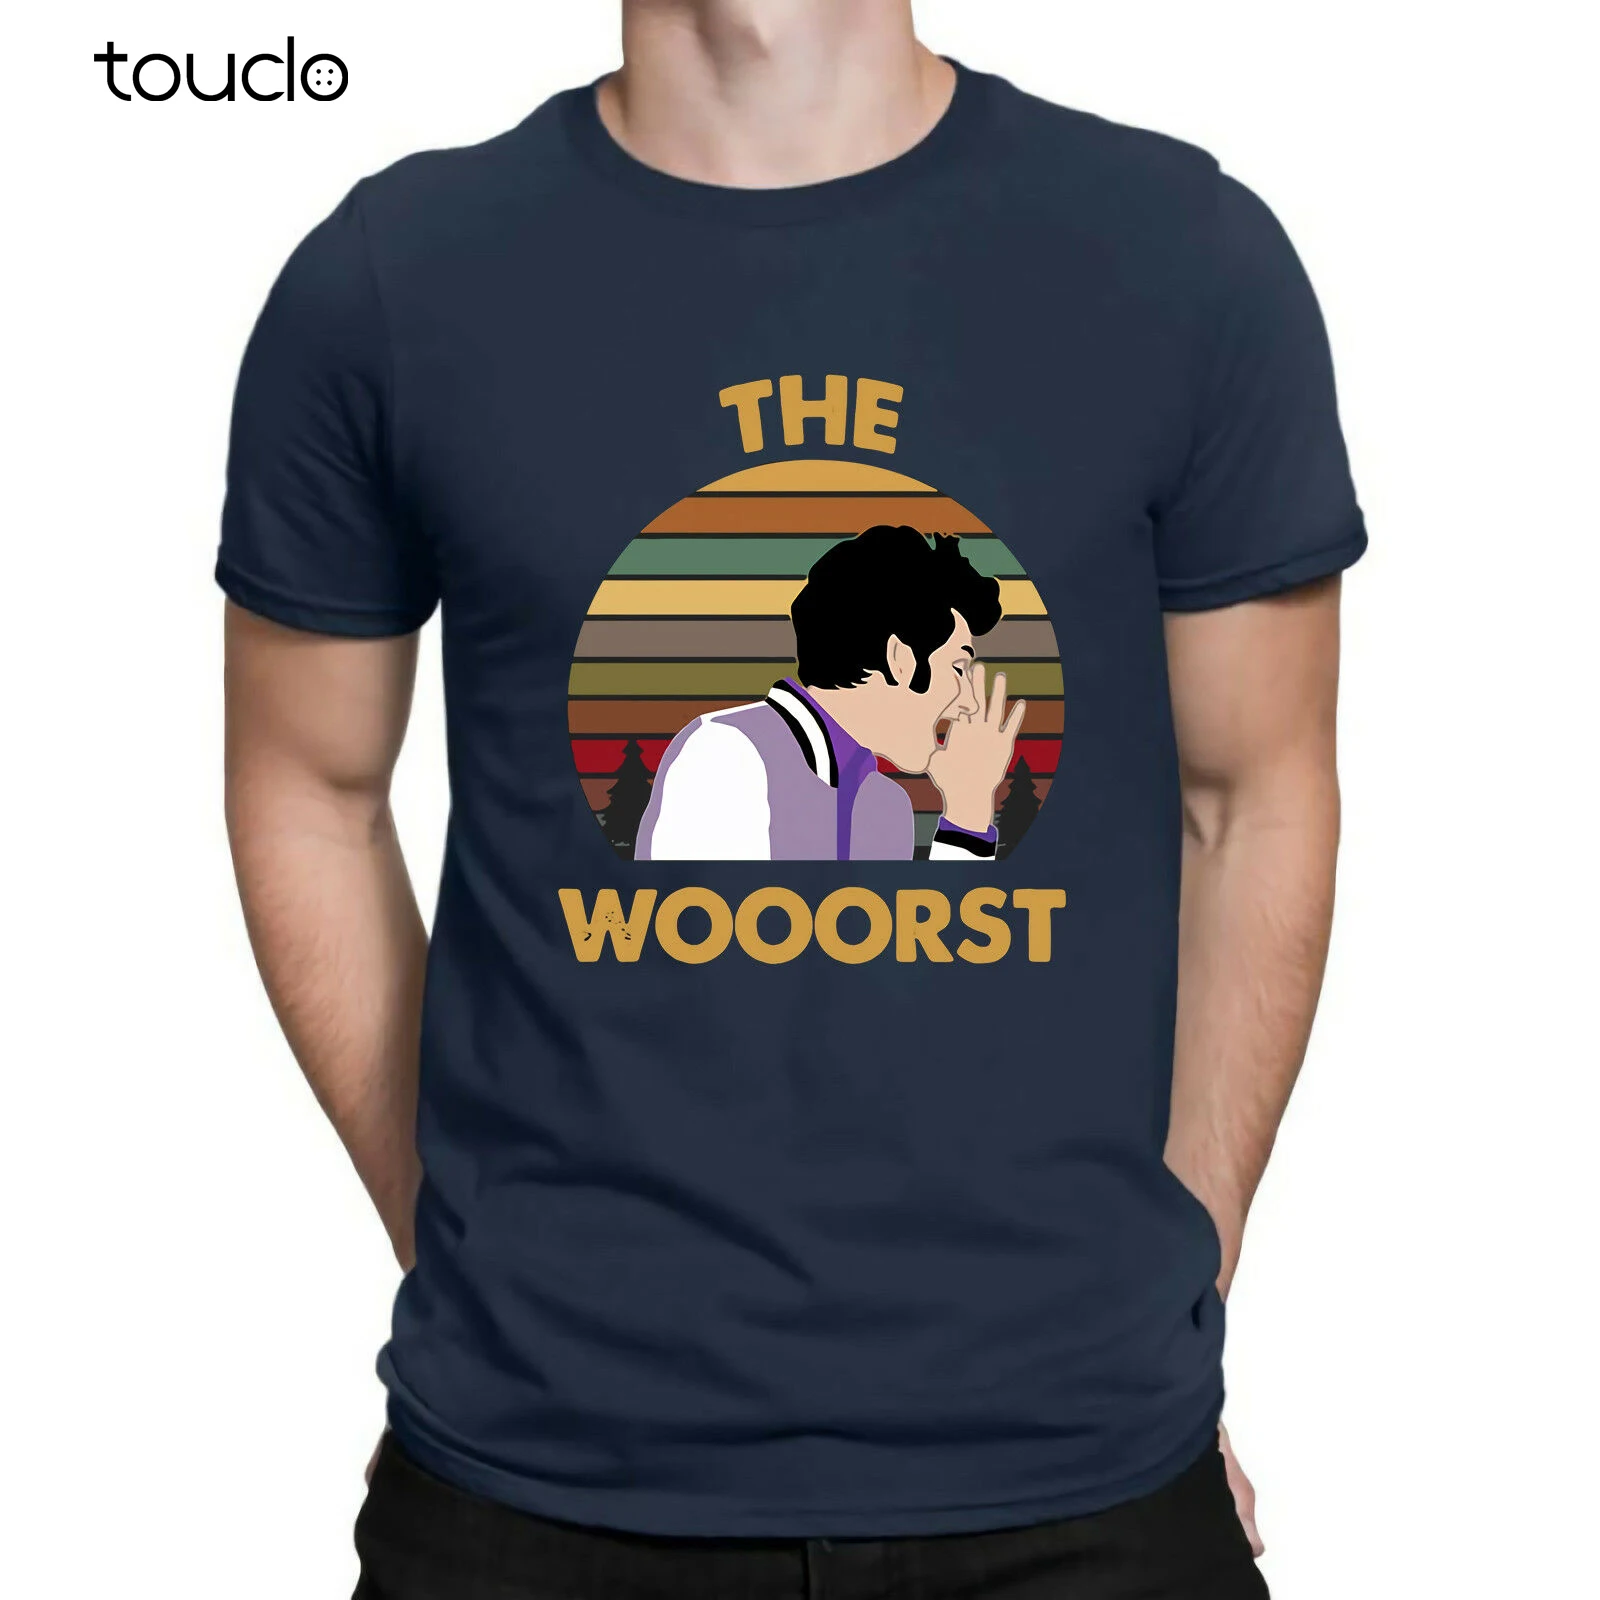 New Jean Ralphio The Wooorst Vintage Graphic T-SHIRT S-5XL 